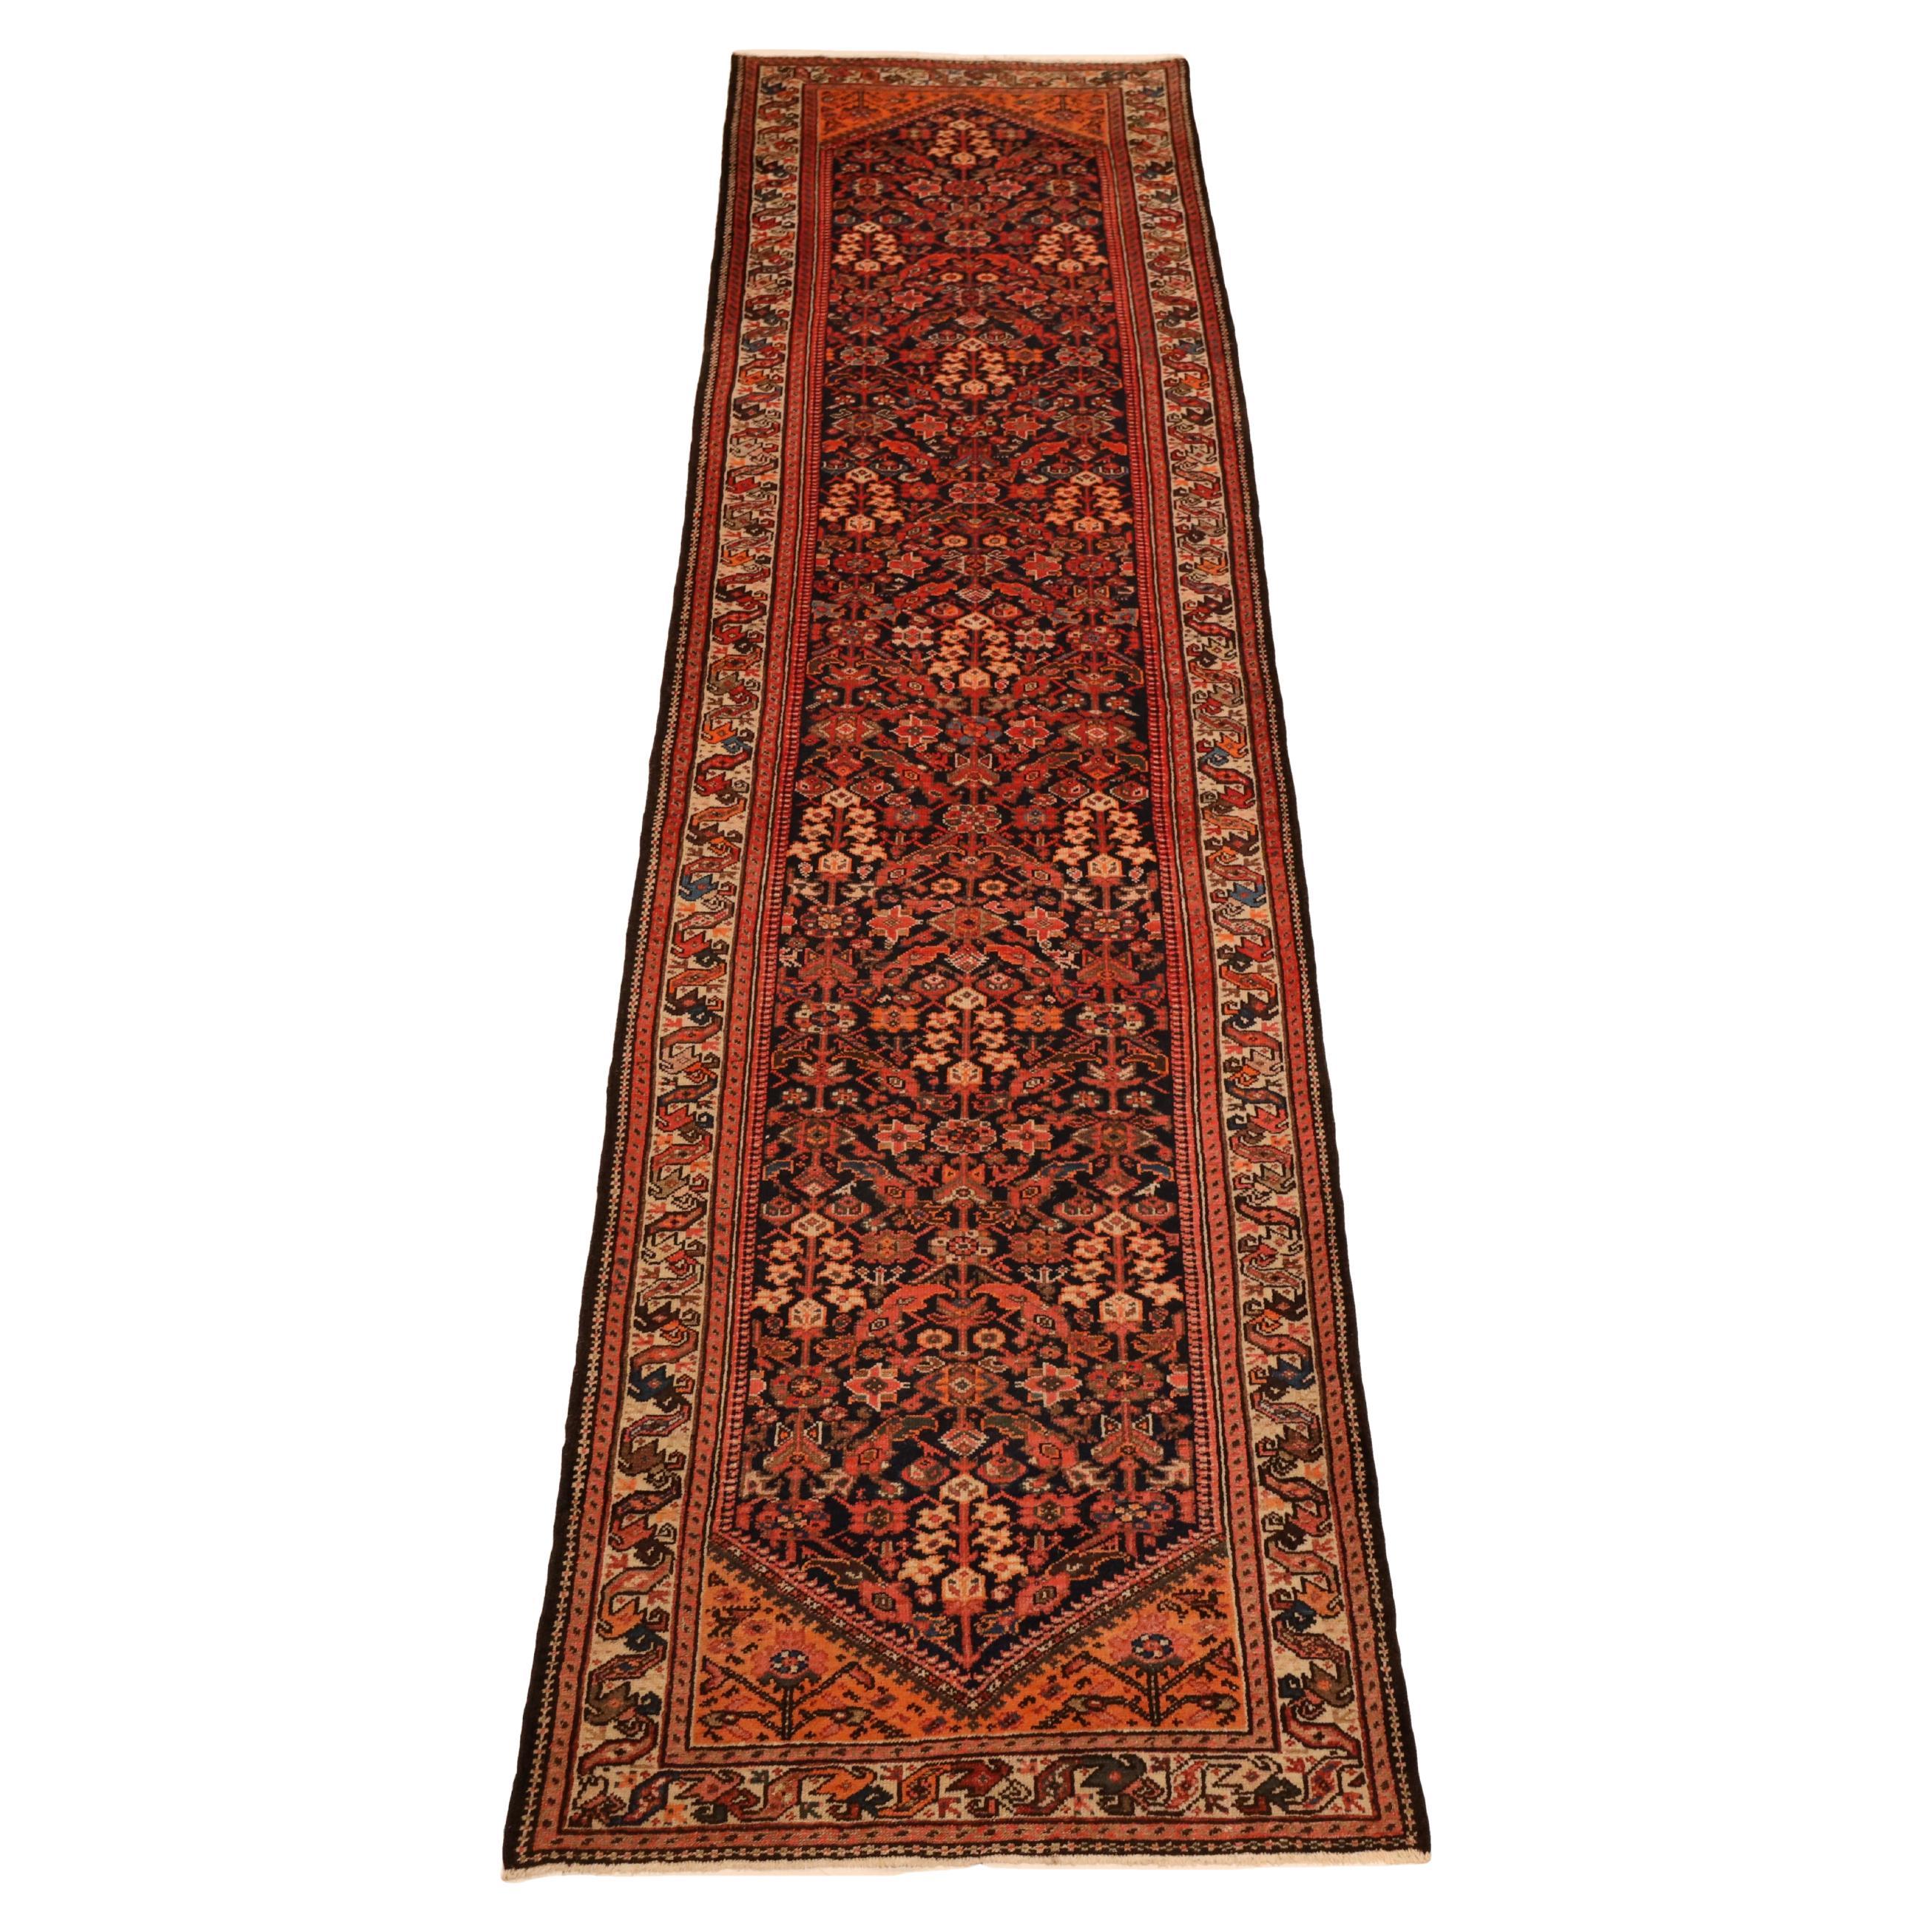 Malayer Antique Runner - 3'5" x 13'1" For Sale